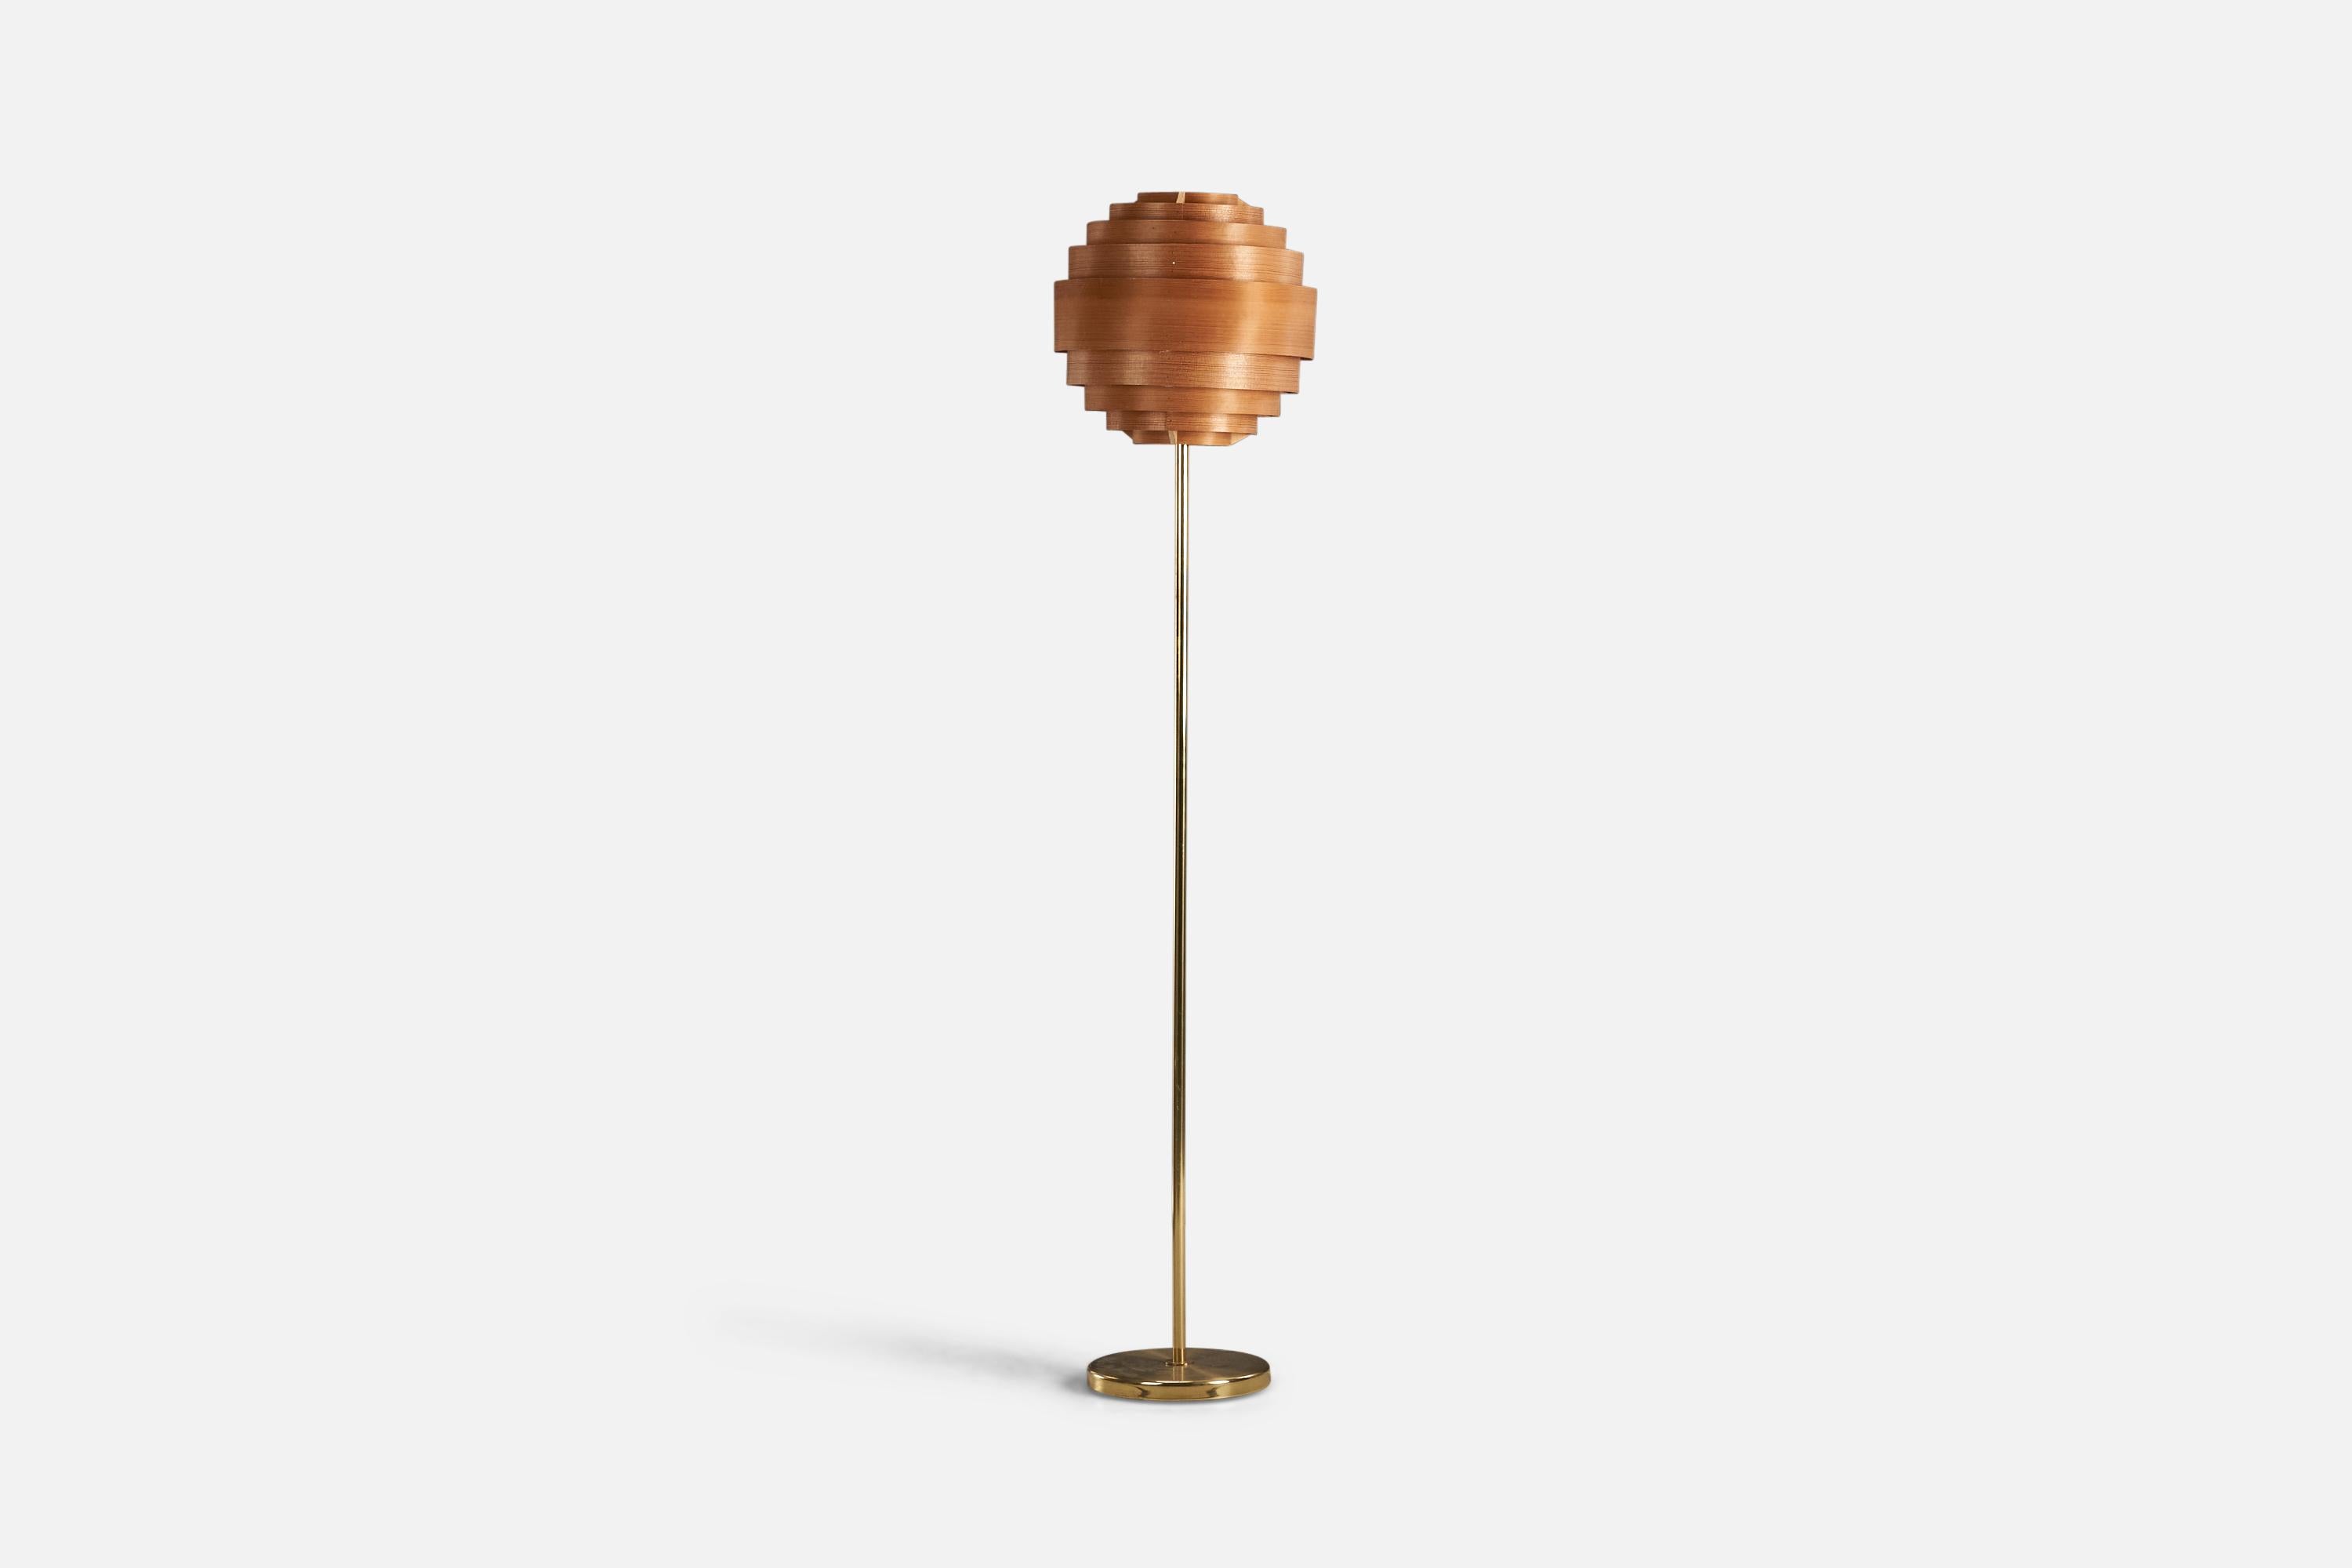 A brass and moulded pine veneer floor lamp designed and produced by a Swedish Designer, Sweden, 1970s.

With an assorted vintage lampshade designed by Hans-Agne Jakobsson.

Socket takes standard E-26 medium base bulb.

There is no maximum